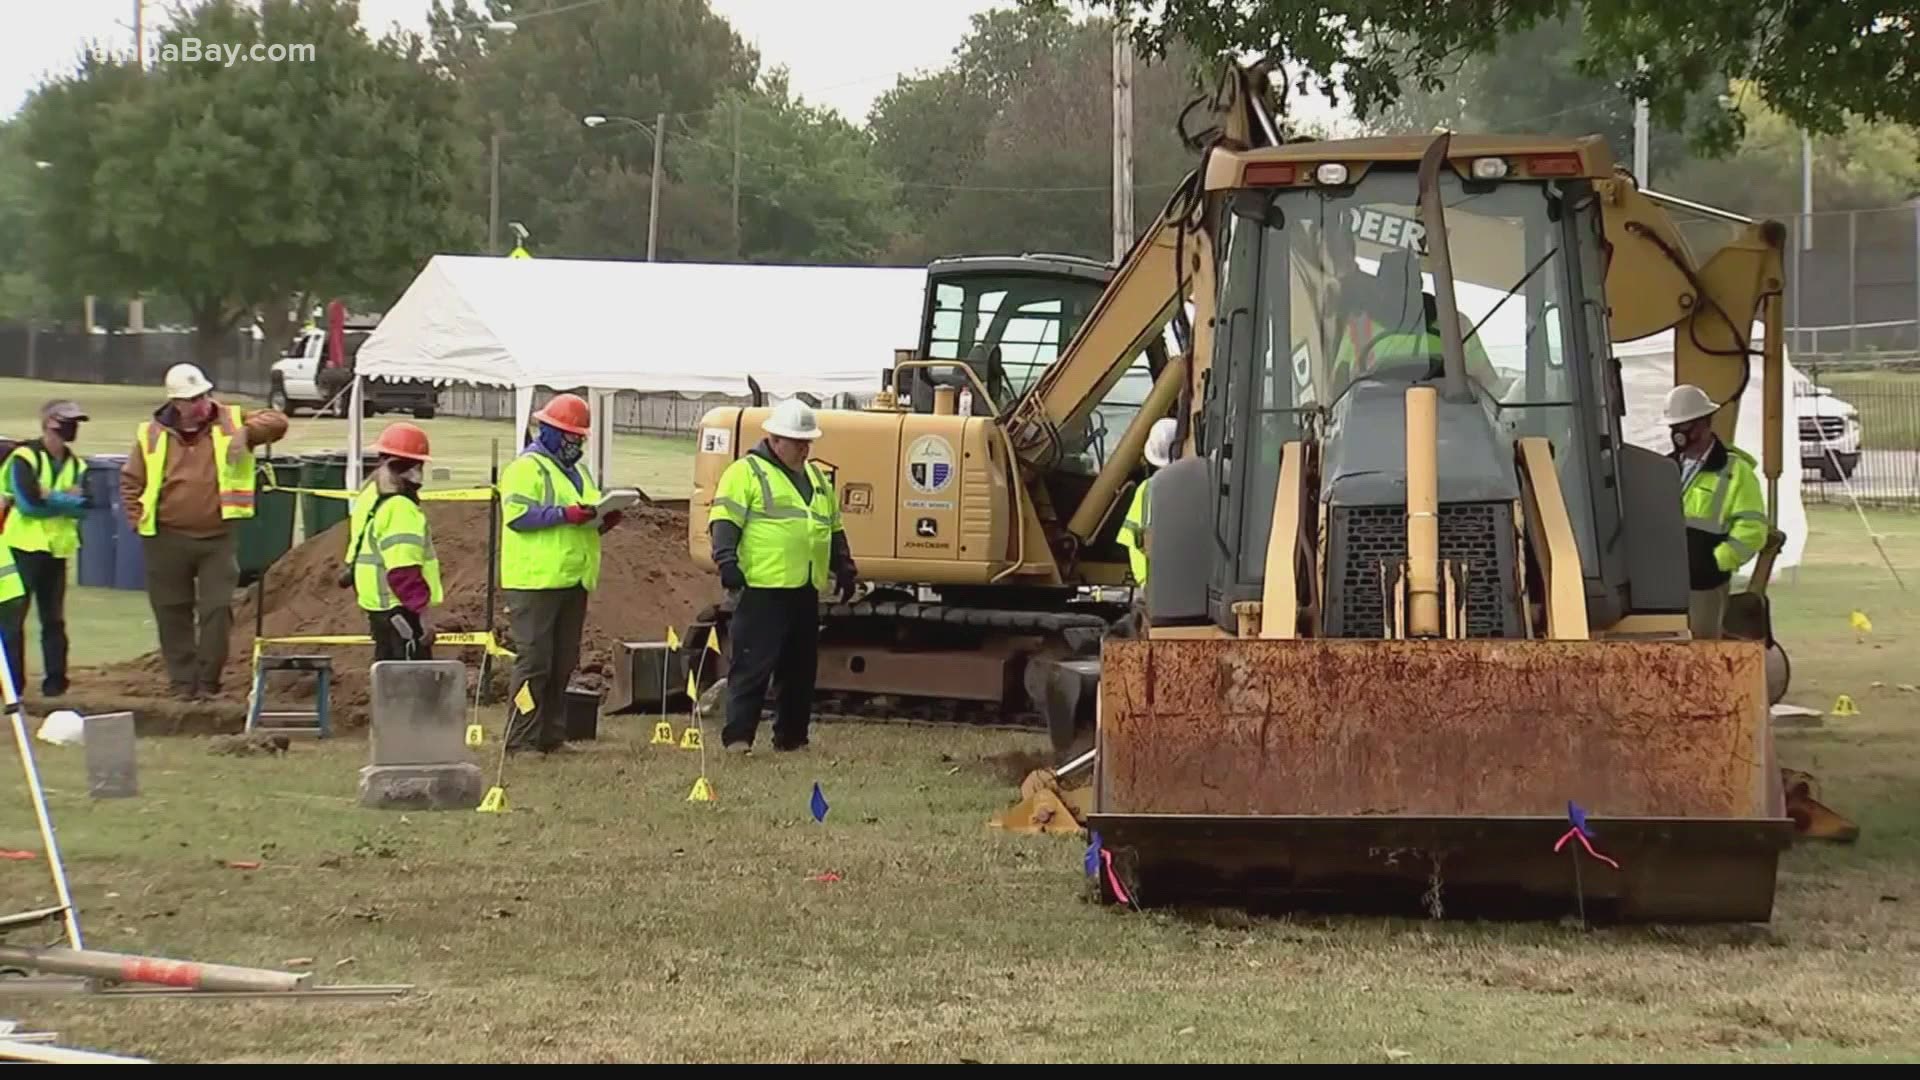 Oklahoma state archaeologist Kary Stackelbeck says the bodies were found Wednesday in 10 coffins in Oaklawn Cemetery.